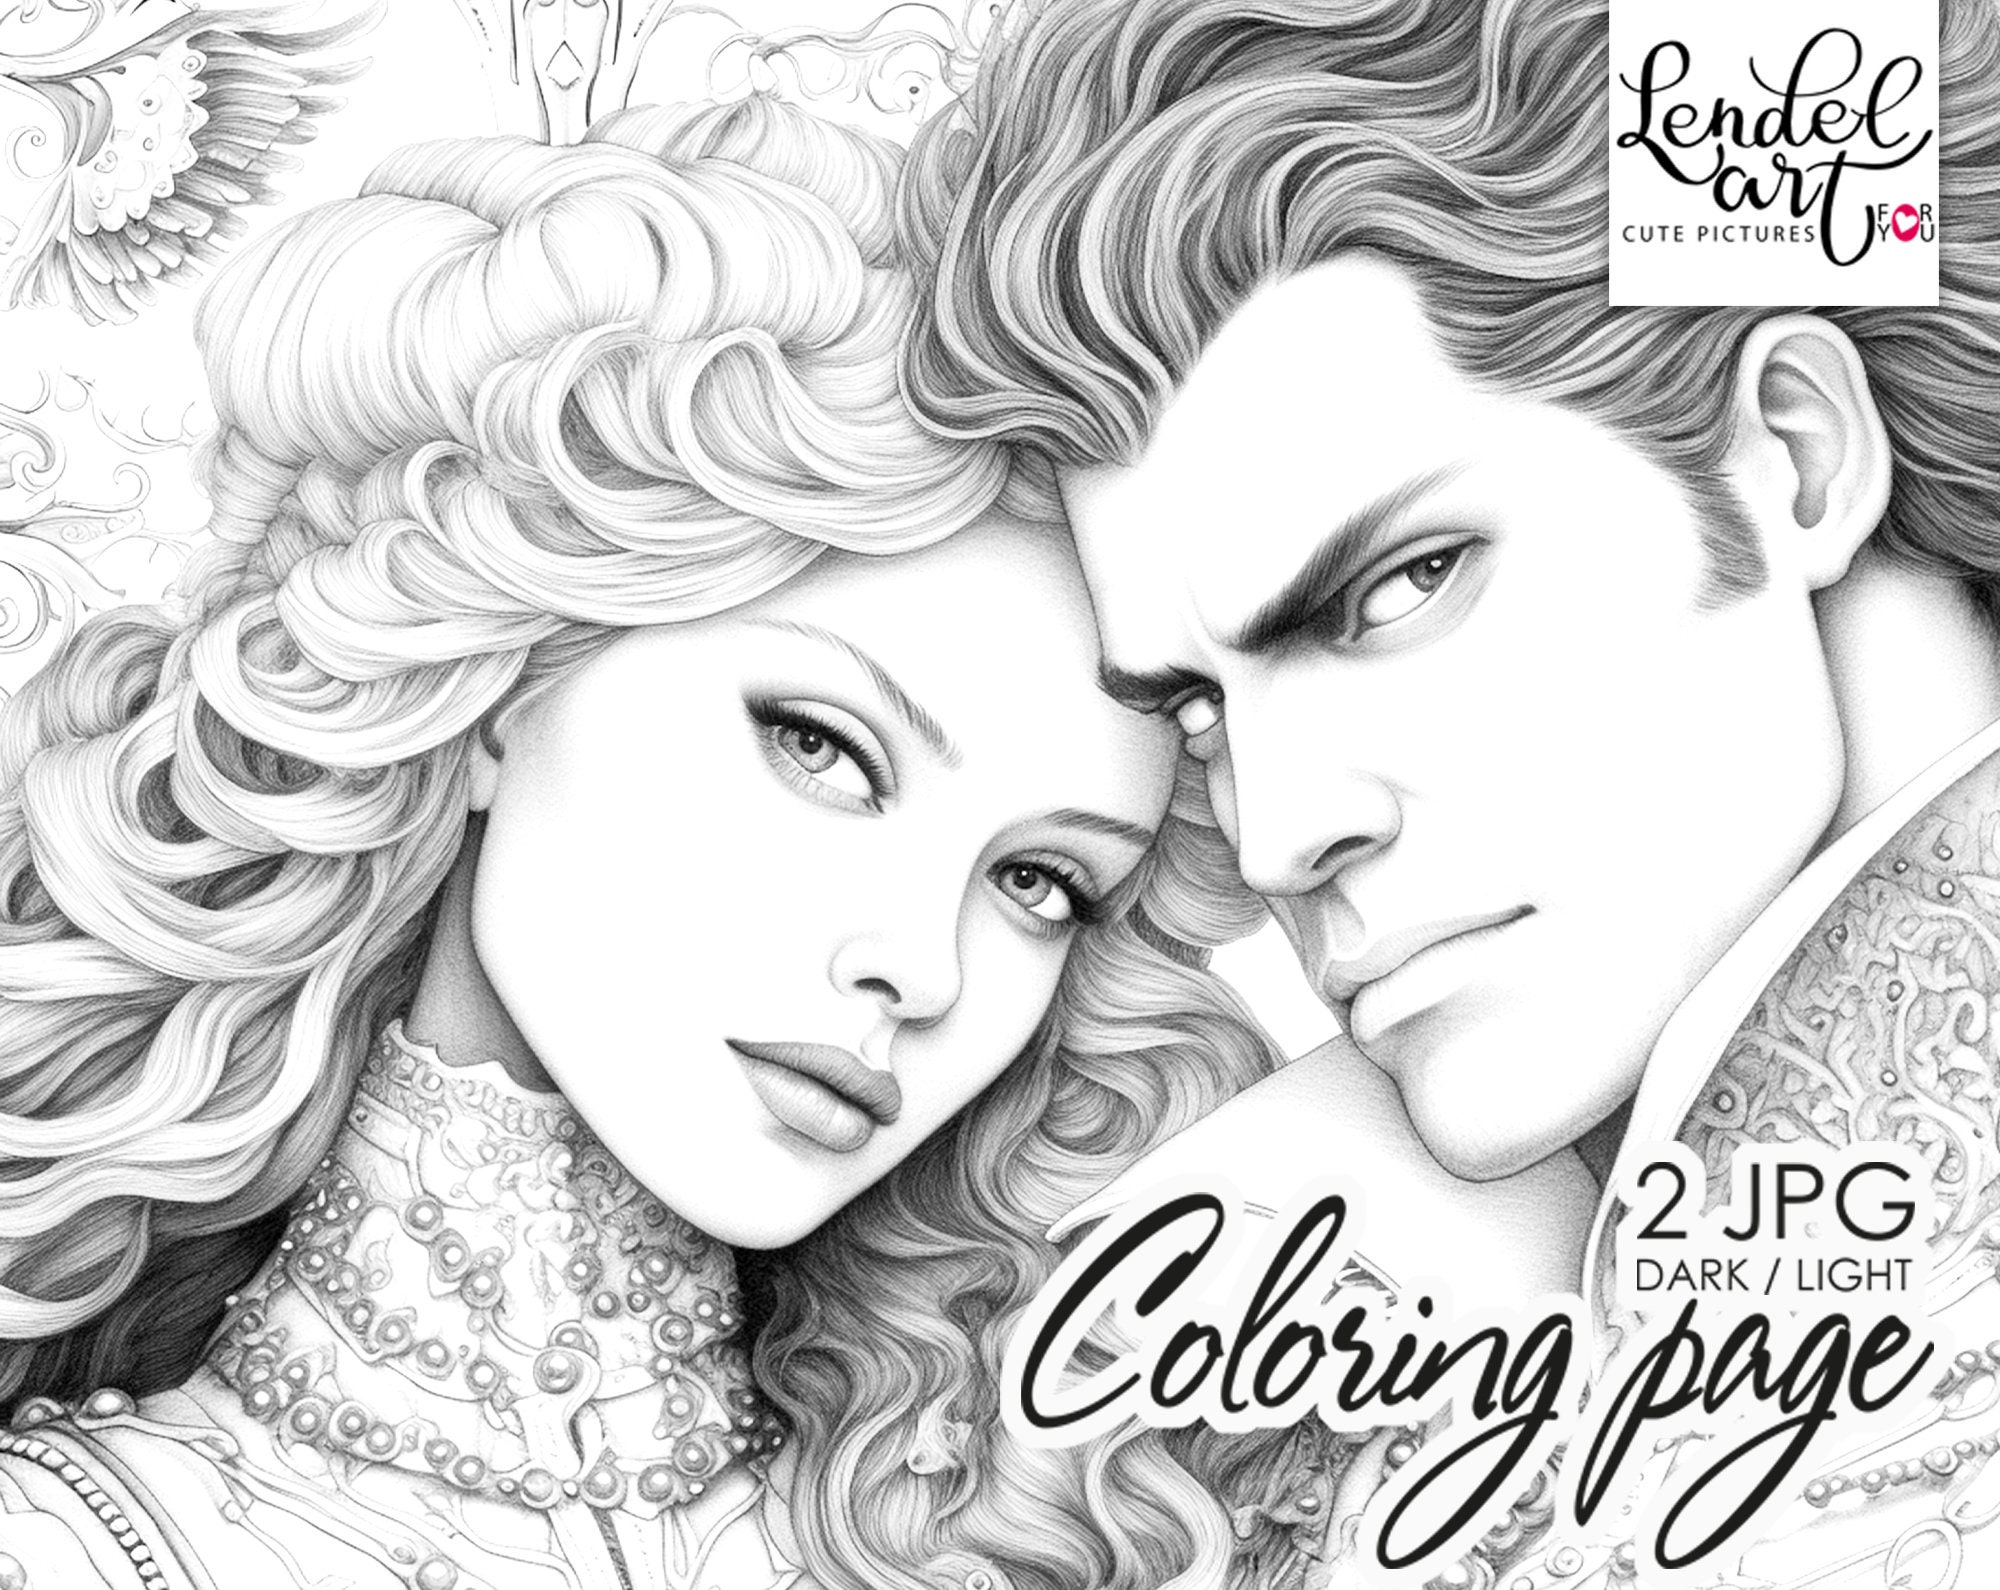 printable twilight coloring pages